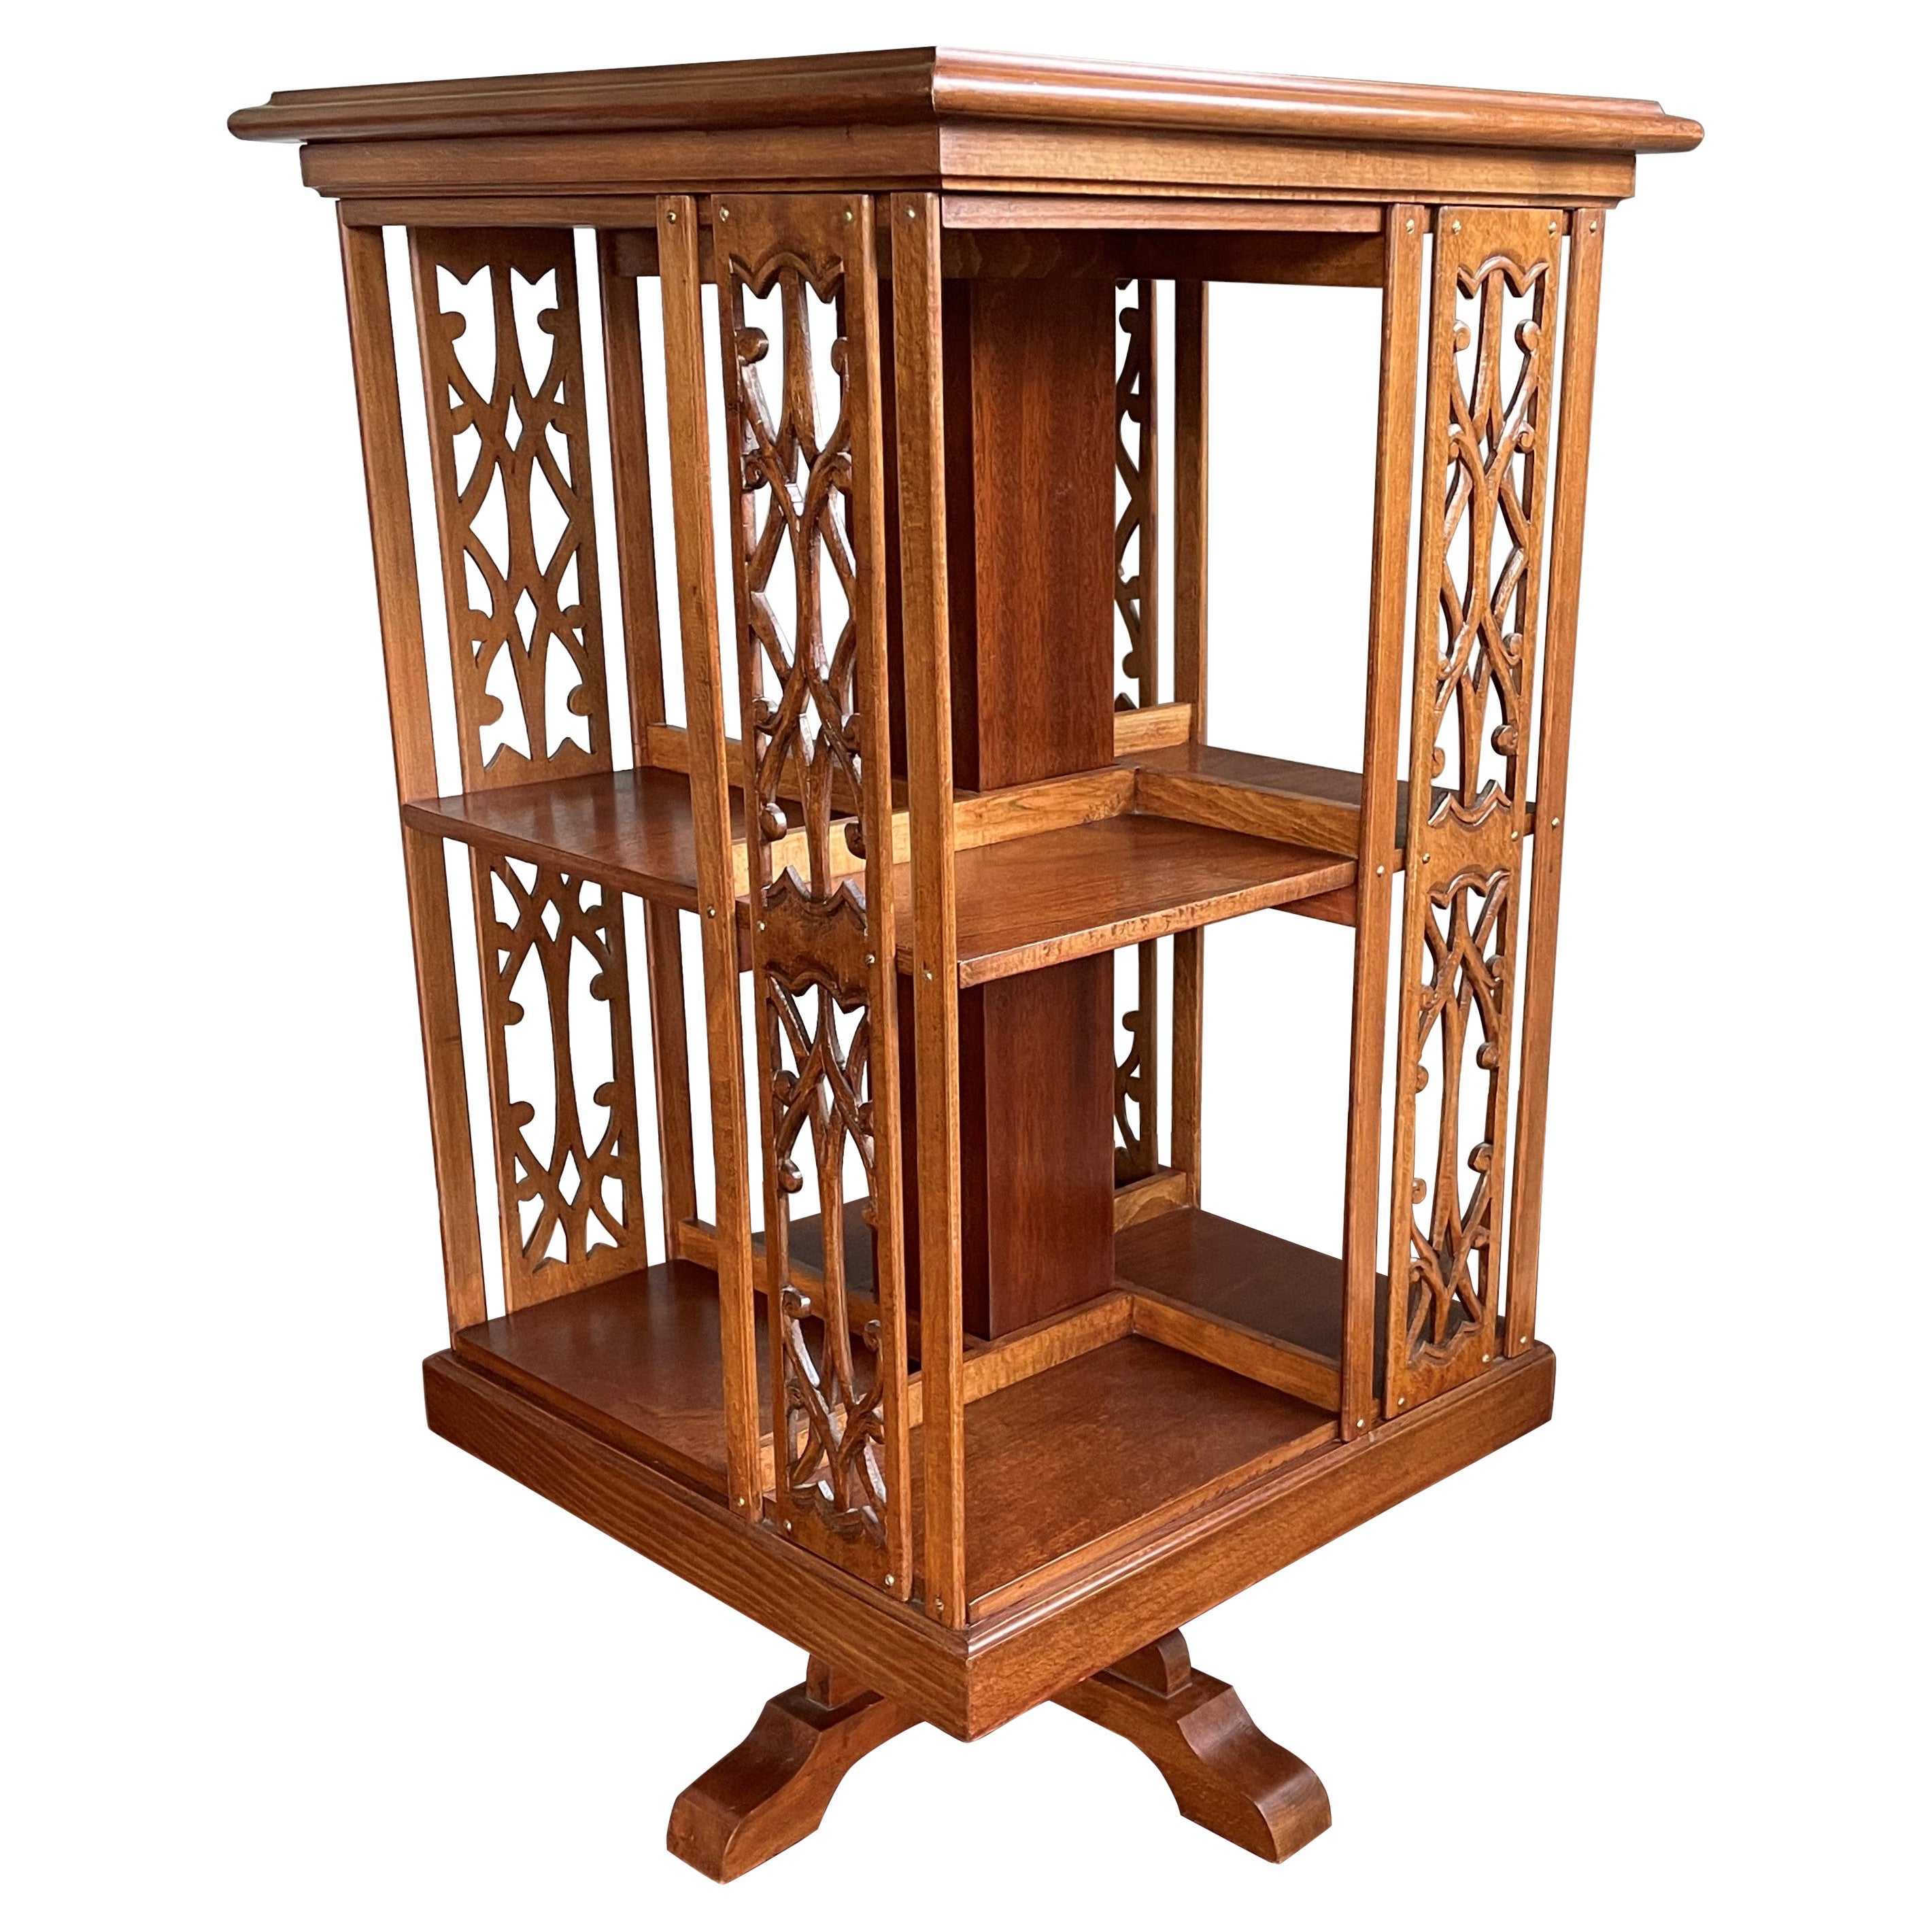 Stylish and Practical Hand Carved Wooden Arts & Crafts Style Revolving Bookcase